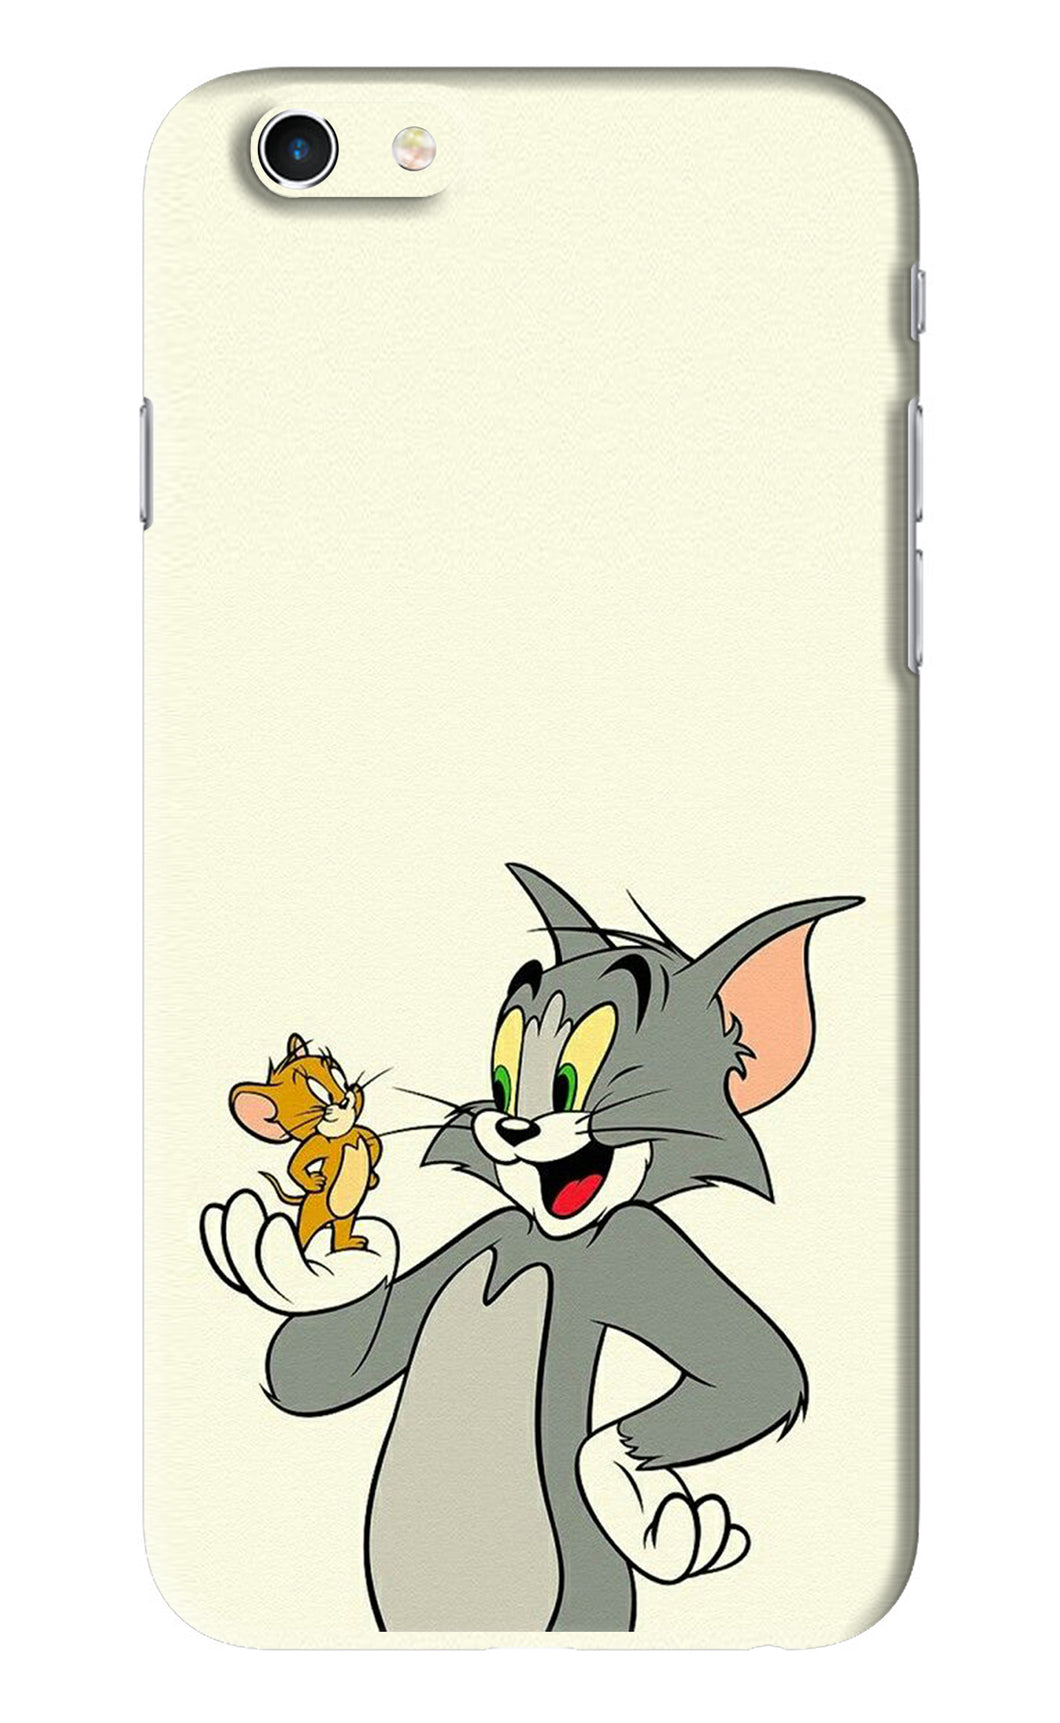 Tom & Jerry iPhone 6S Back Skin Wrap